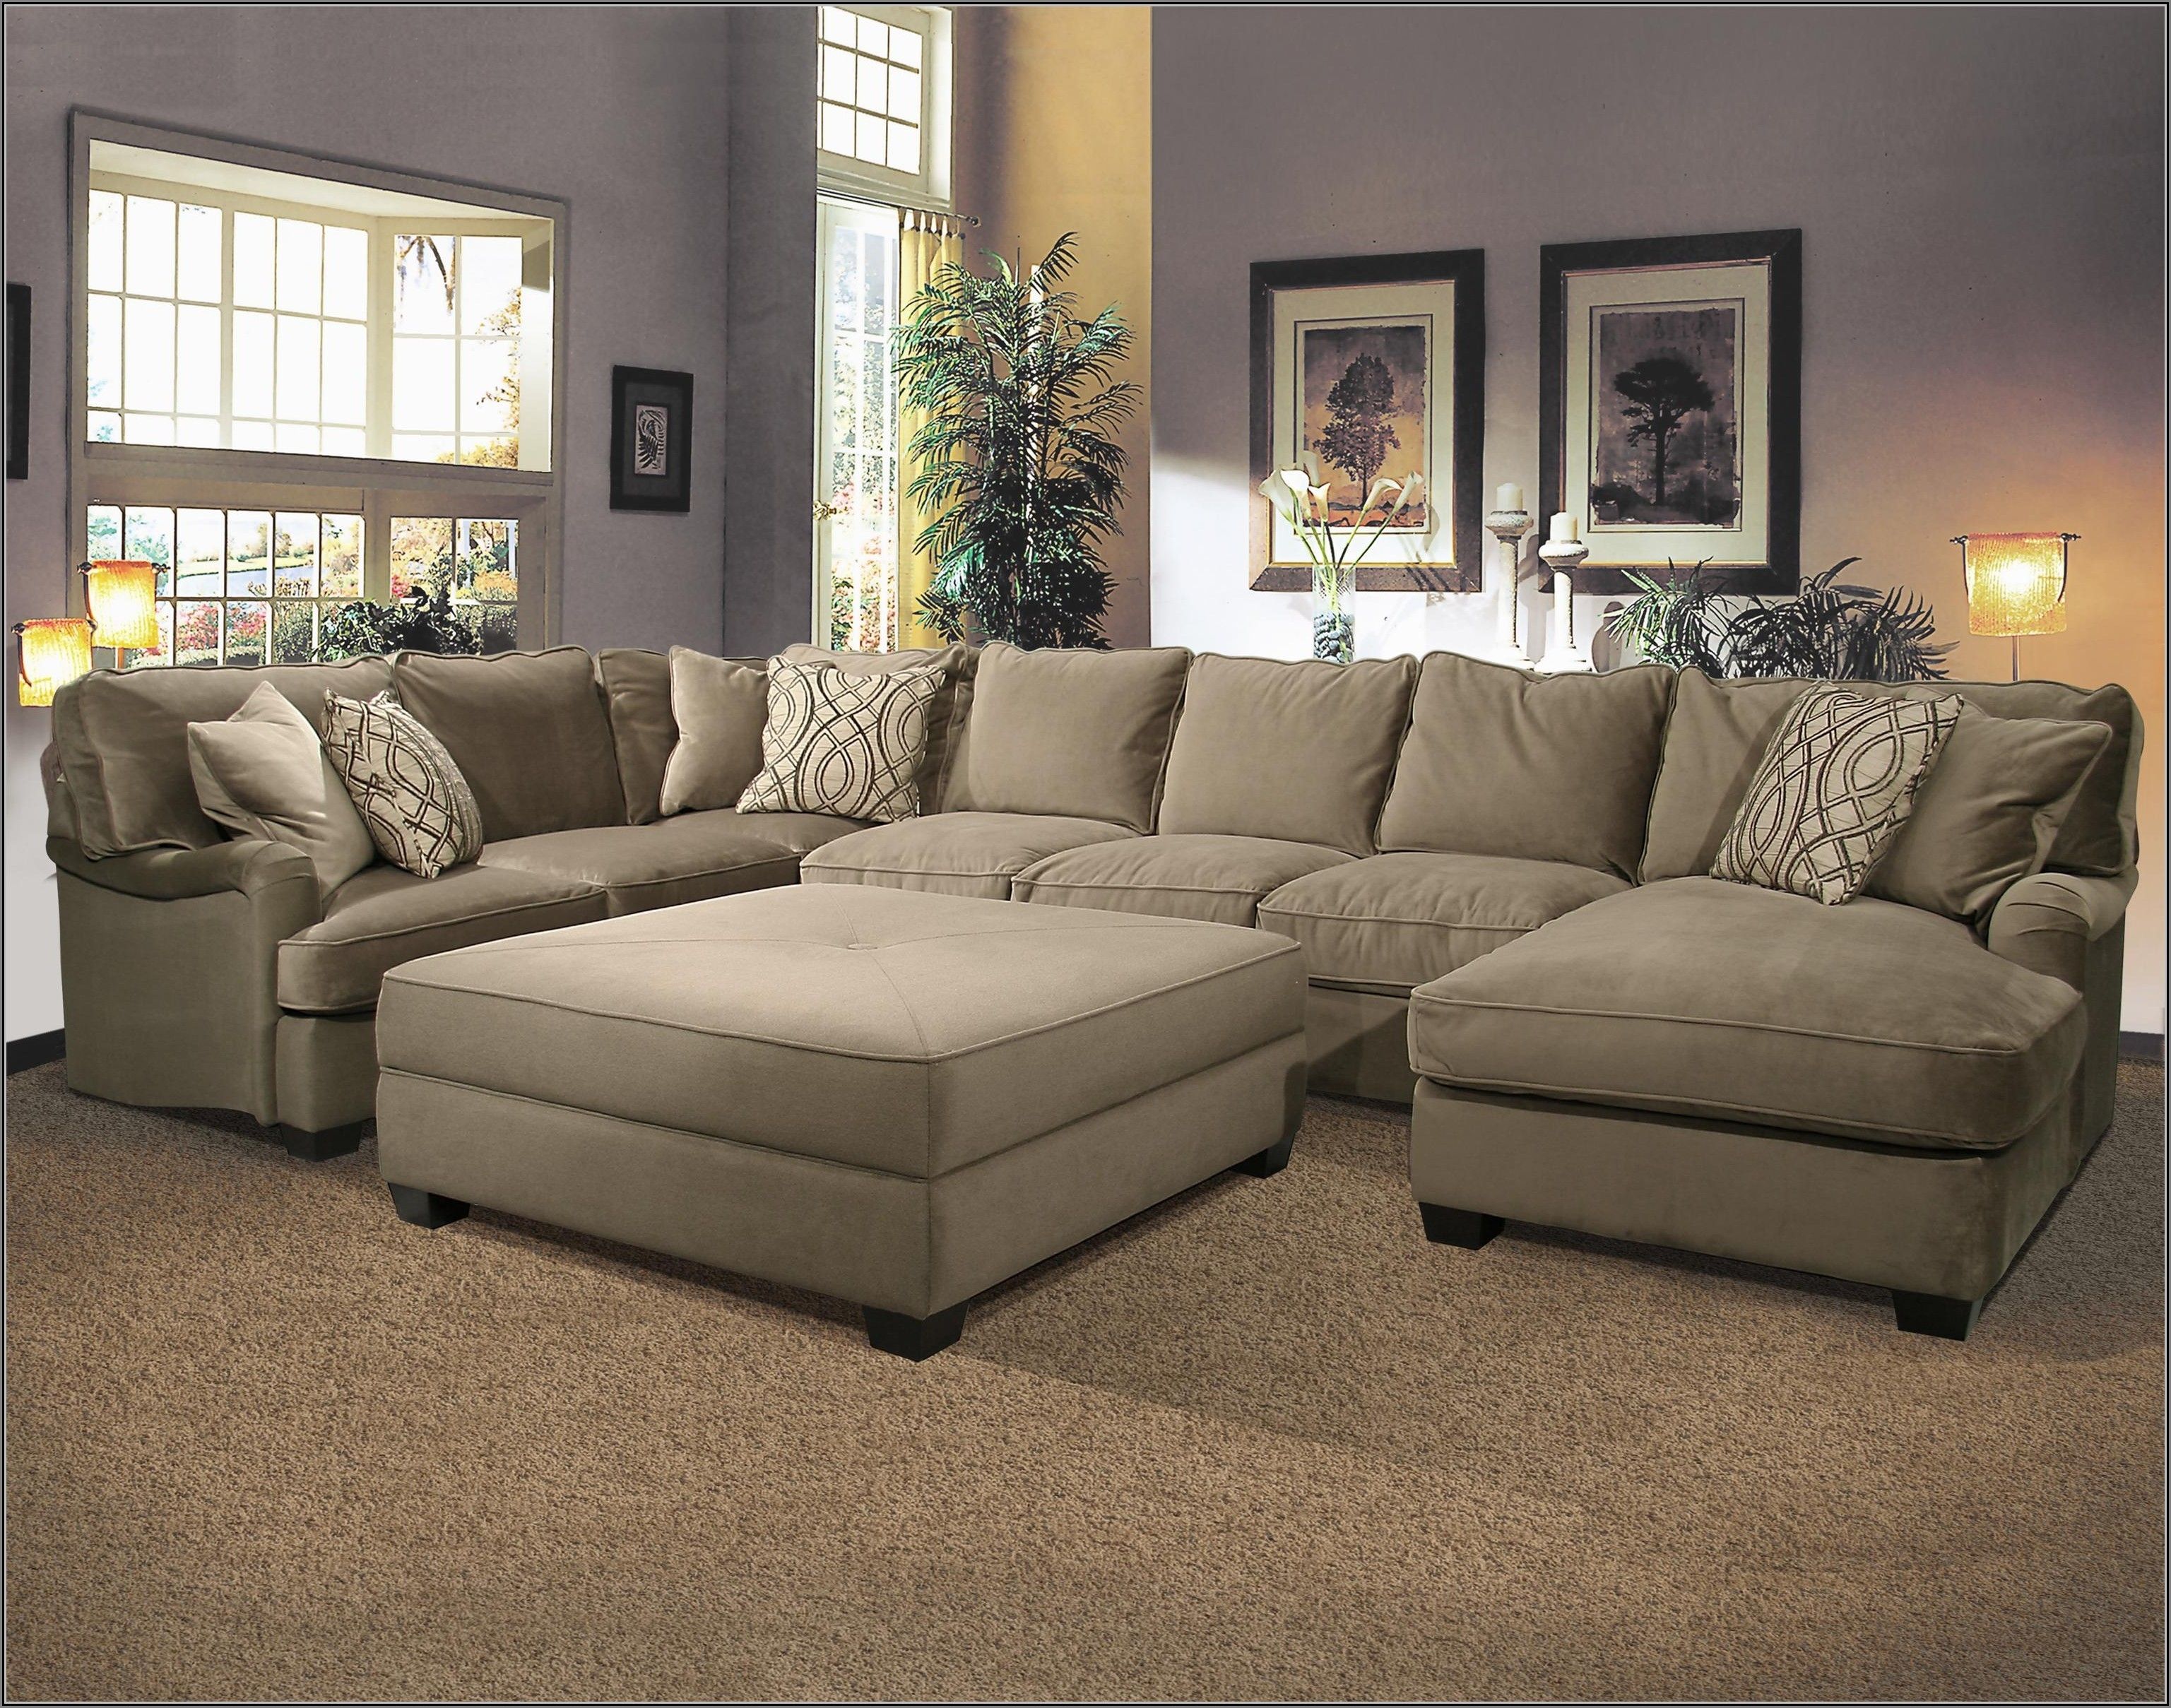 Sectional Sofa With Large Ottoman Hotelsbacau Com Intended For Within Big U Shaped Sectionals (View 1 of 15)